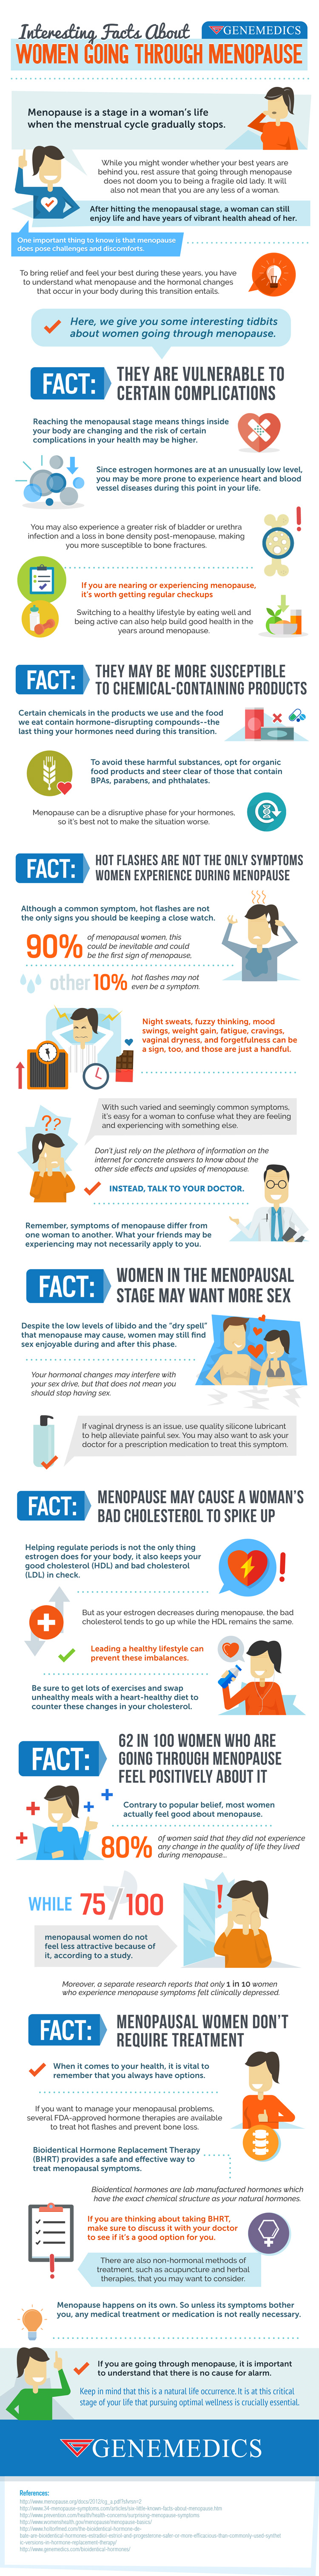 8 Tips to Maintain Your Youthful Look and Vigor (Infographic)